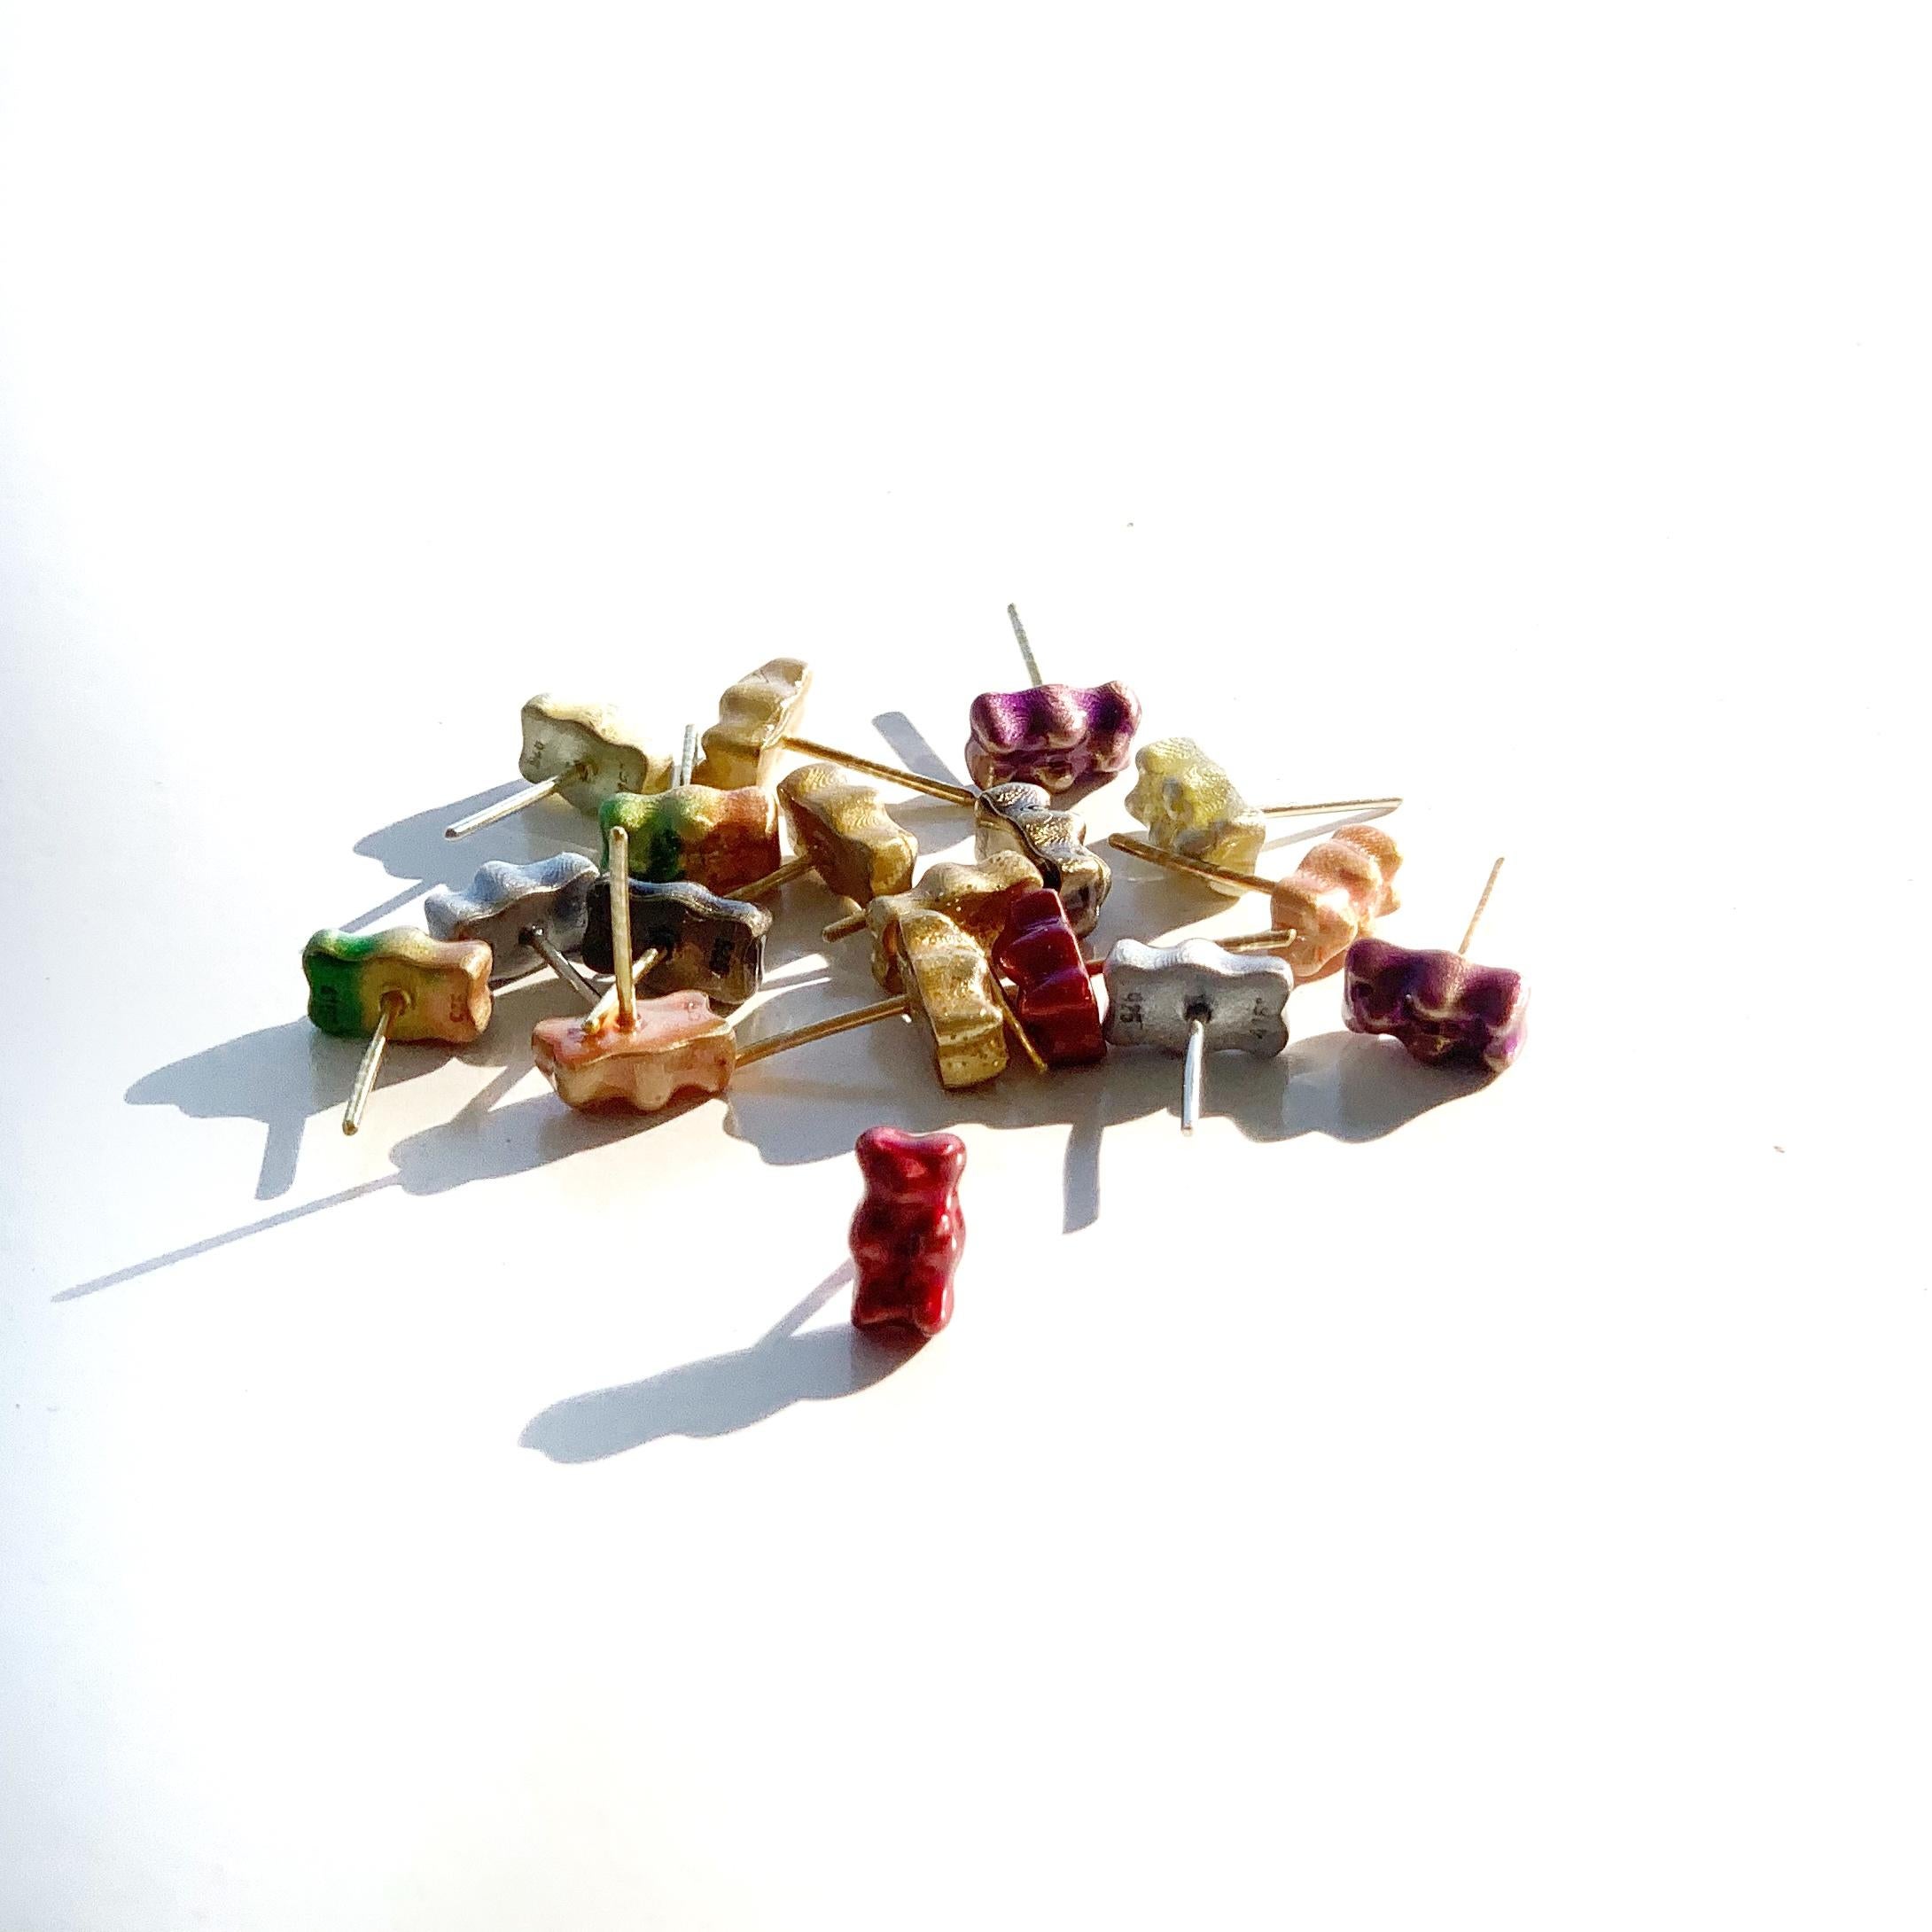 18K gold plated silver gummy bear stud earrings with transparent purple enamel coverage. 

The Gummy Project by Maggoosh is a capsule collection inspired by the designer's life in New York City and her passion for breakdancing and other street arts.